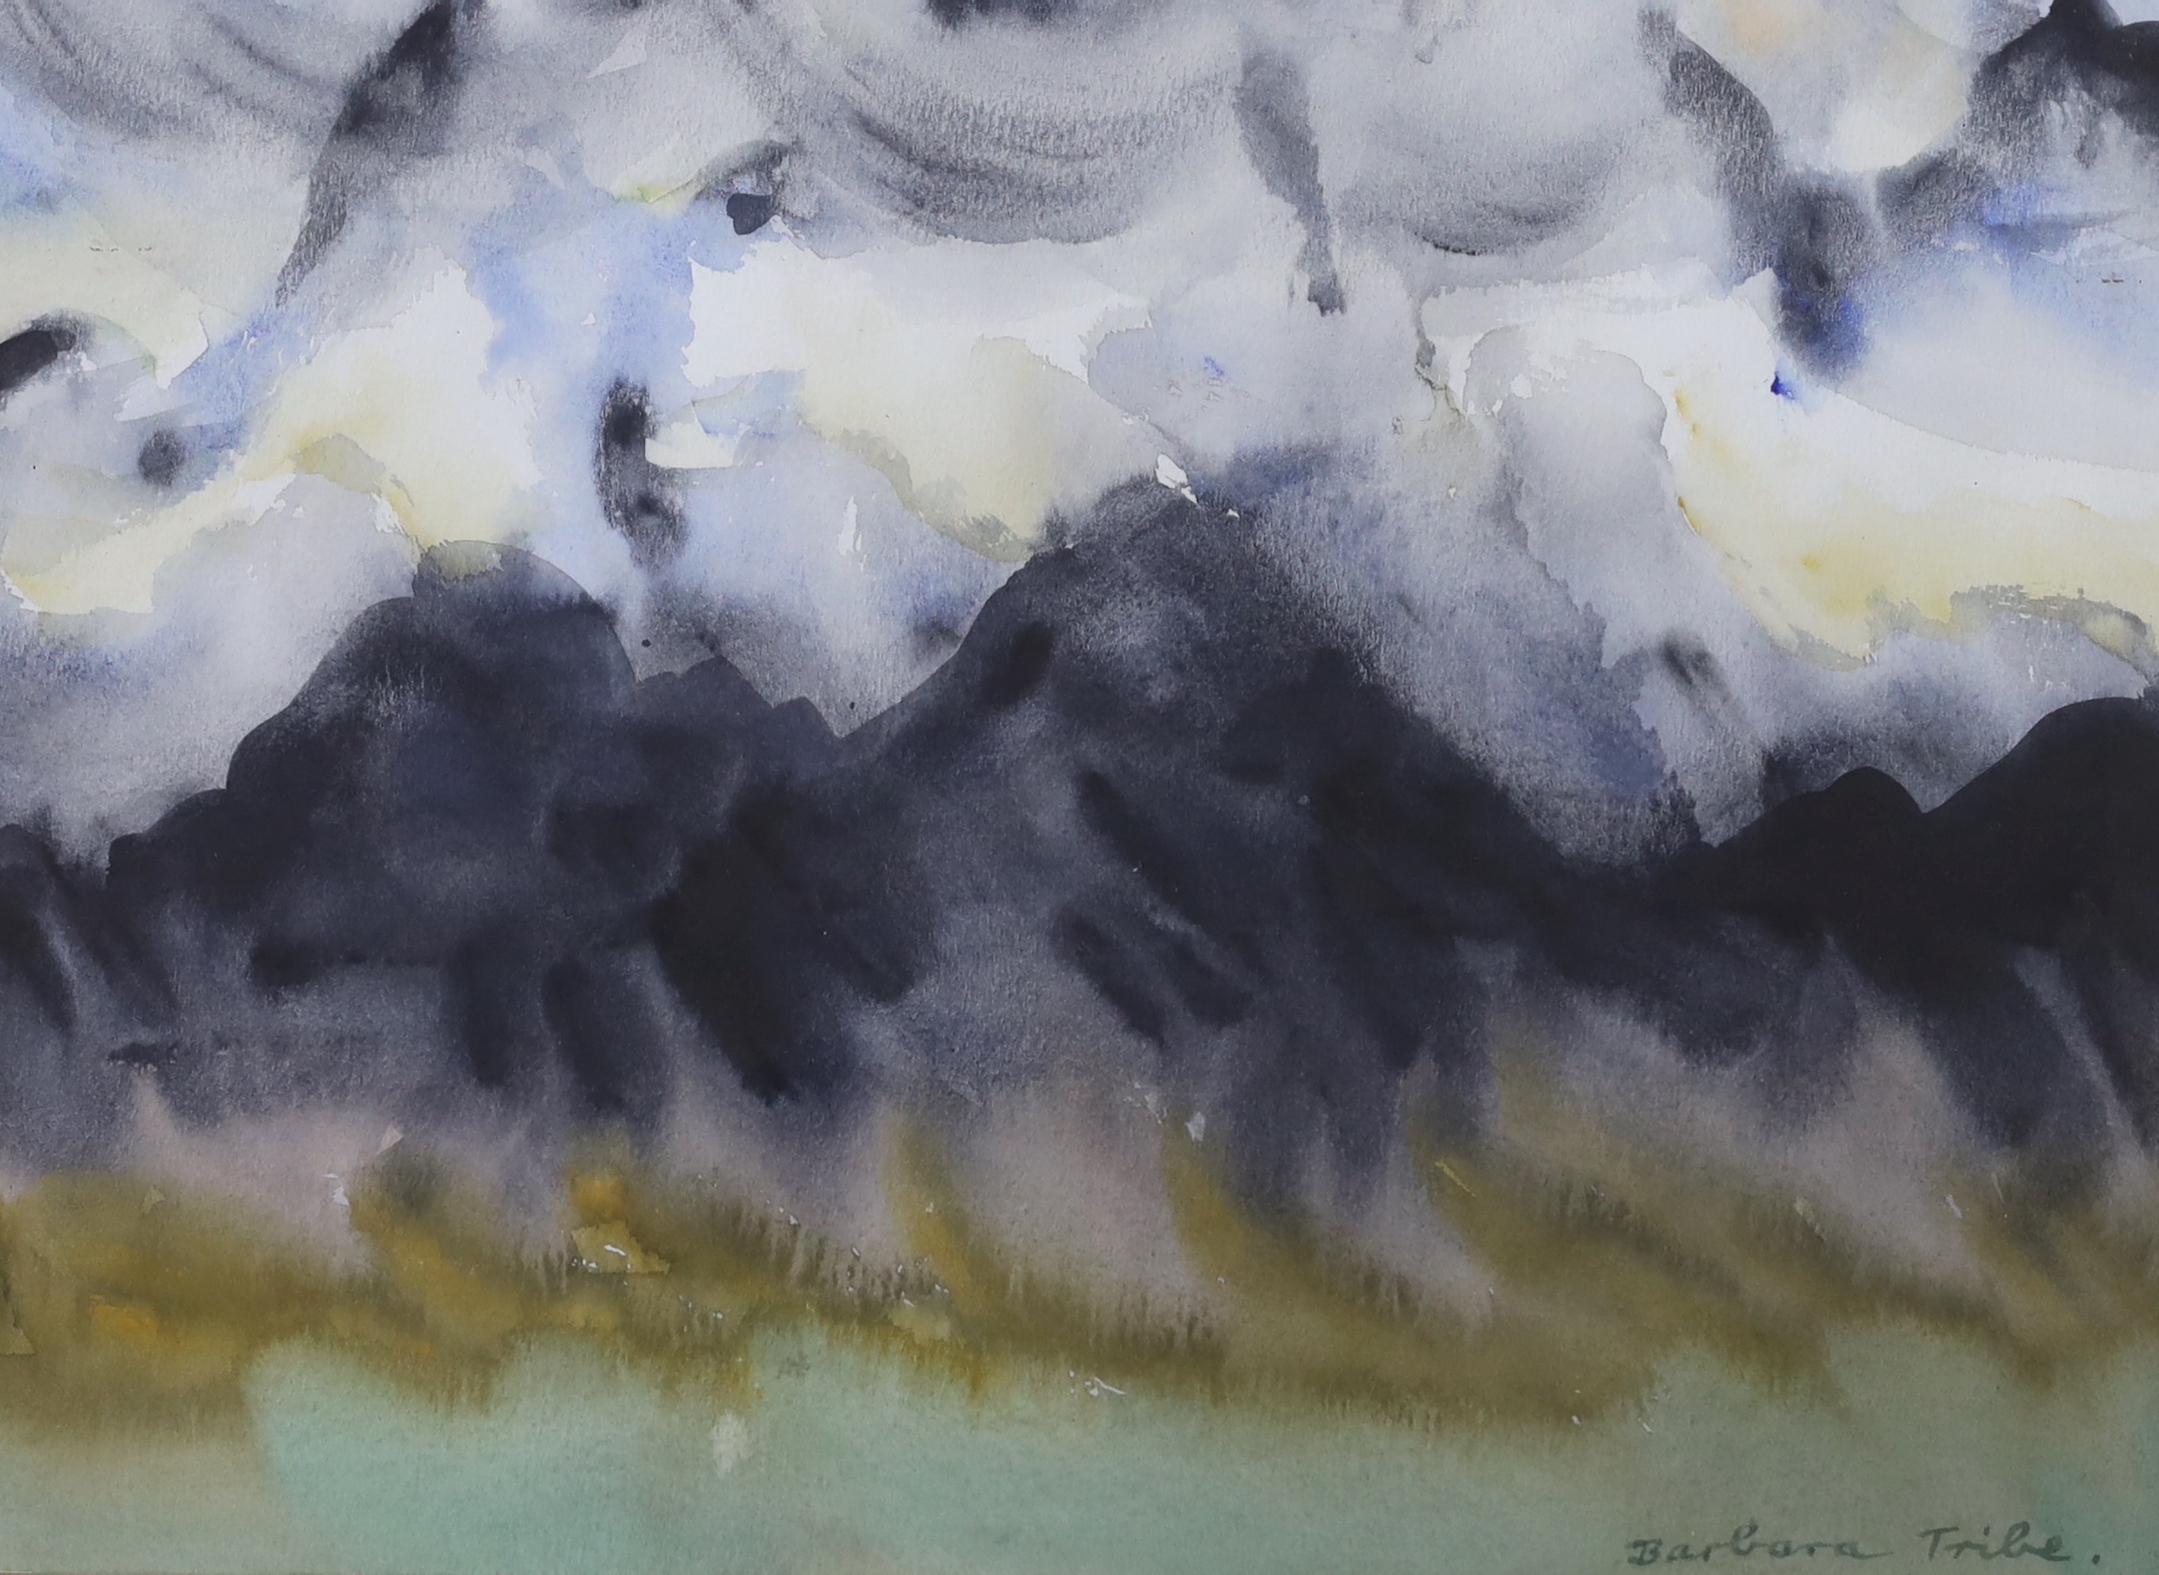 Barbara Tribe (1913-2000), two watercolours, ‘Pillars in the Sand, Western Australia’ and ‘Snow Santa Rita Mountains, Mexico to Arizona', signed, labels verso, the largest 33cm x 24cm